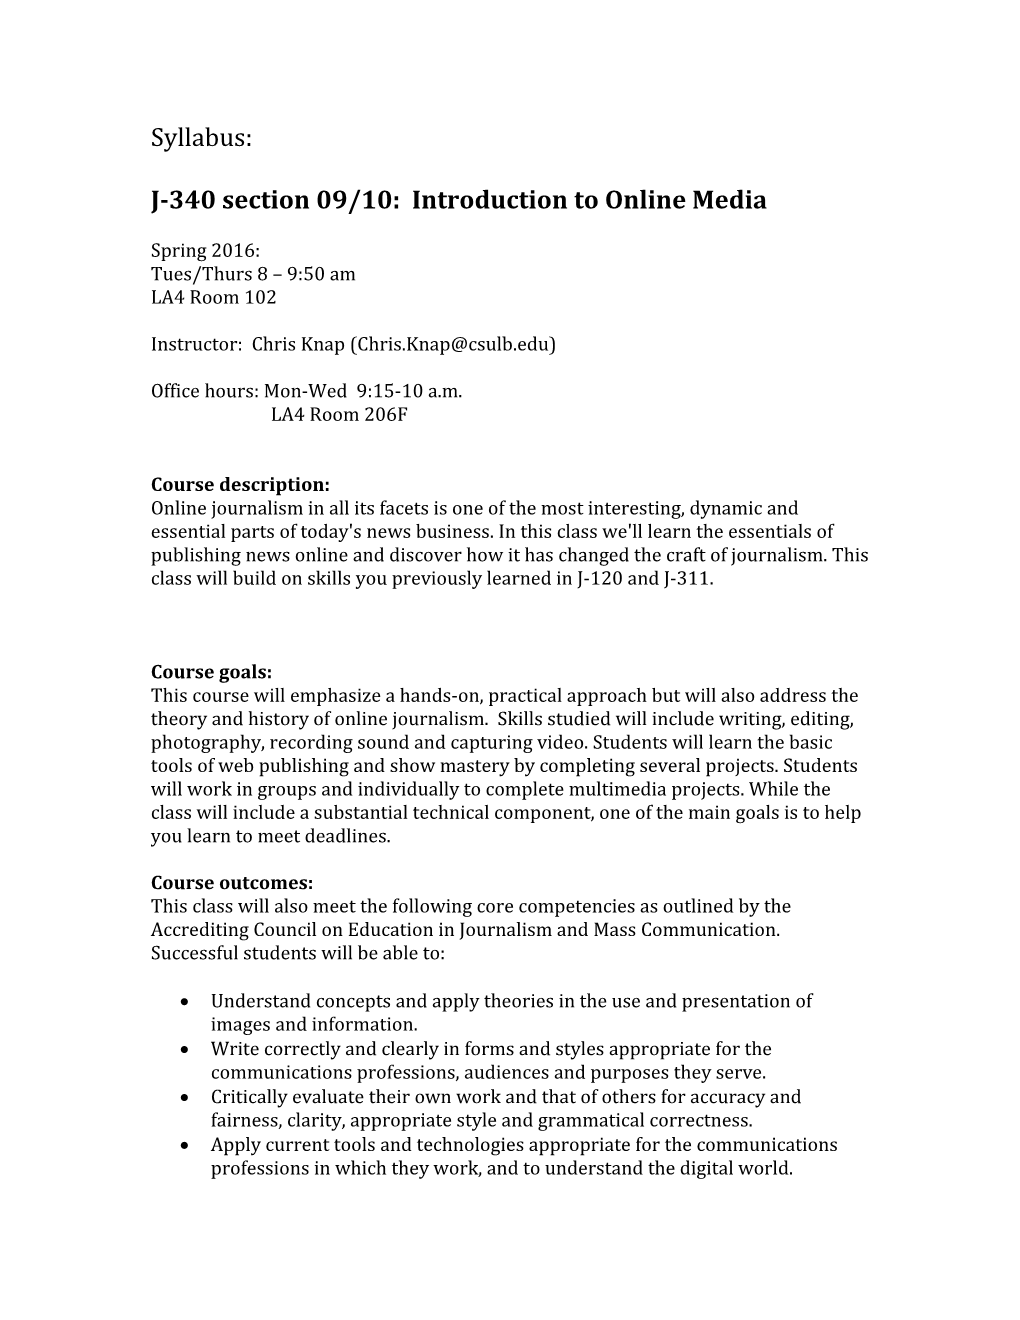 J-340 Section 09/10: Introduction to Online Media